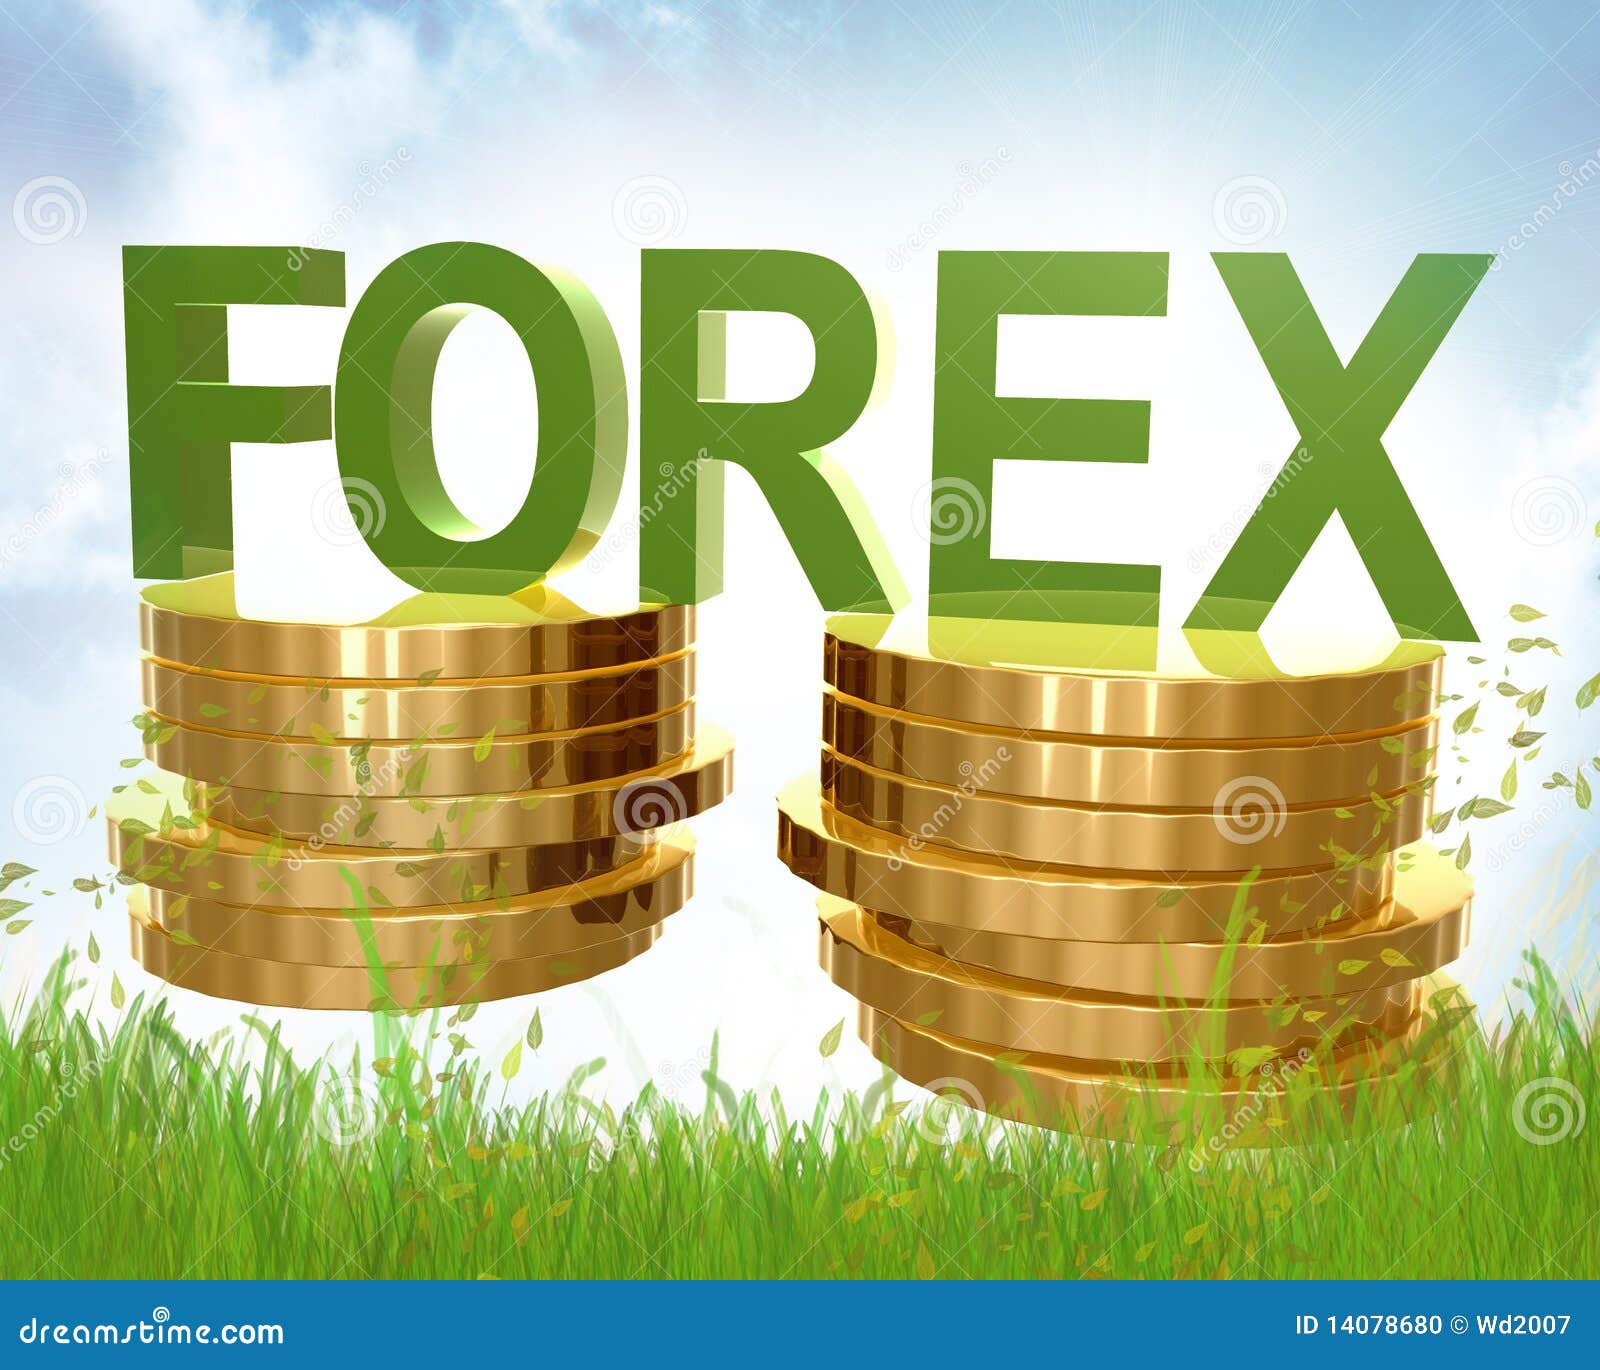 Trading gold forex